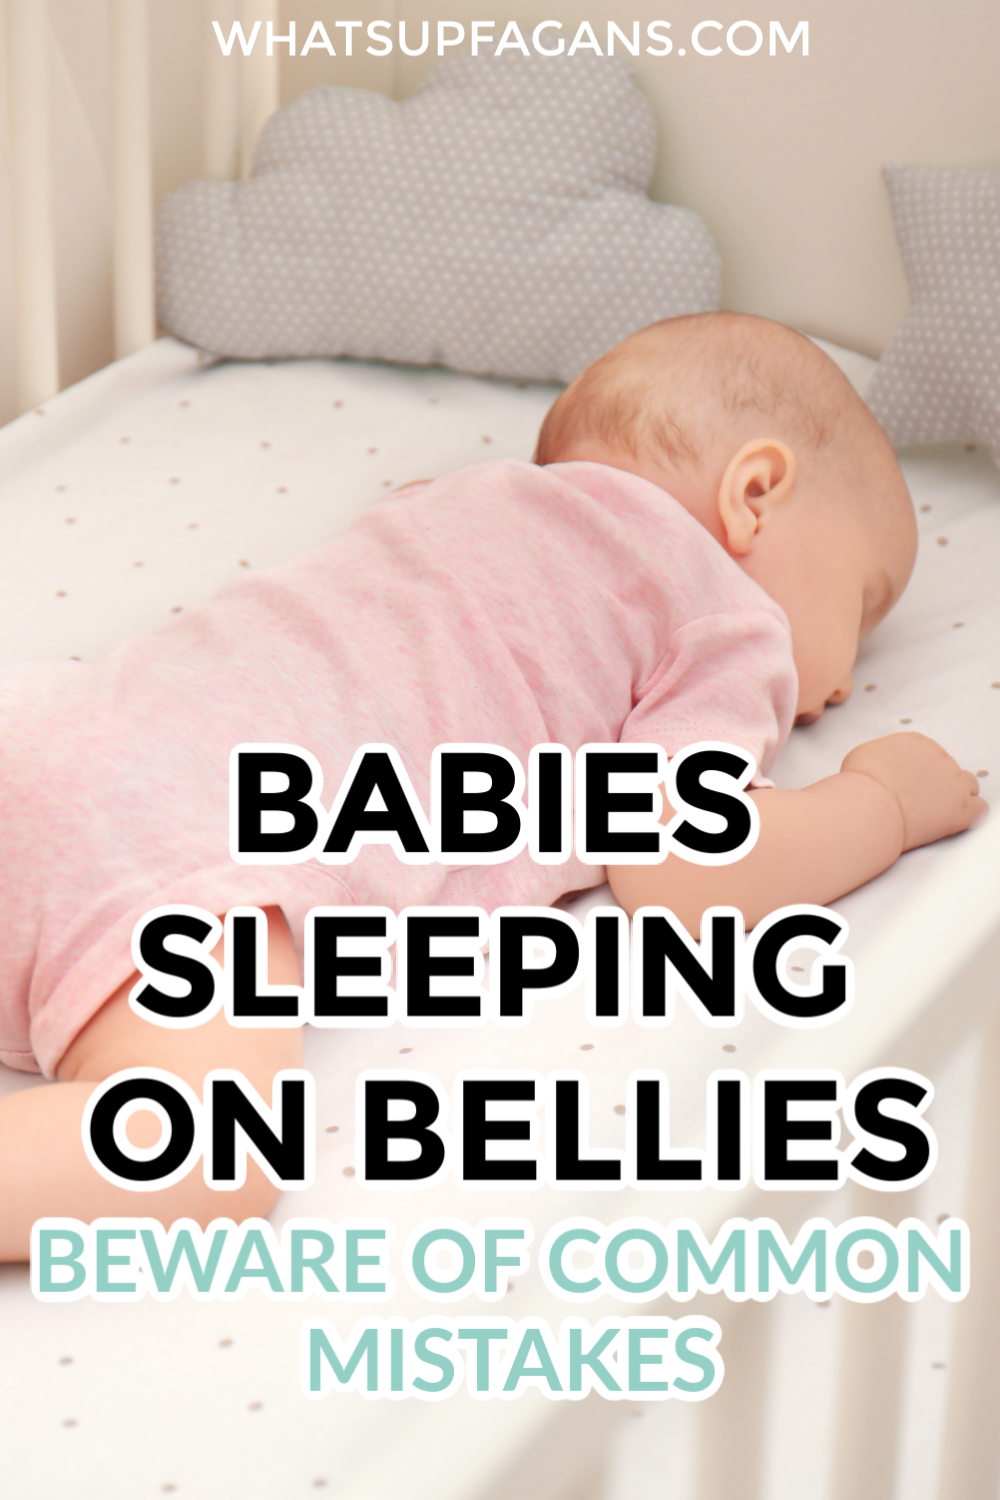 Got a Baby Rolling Over In Her Sleep? Here